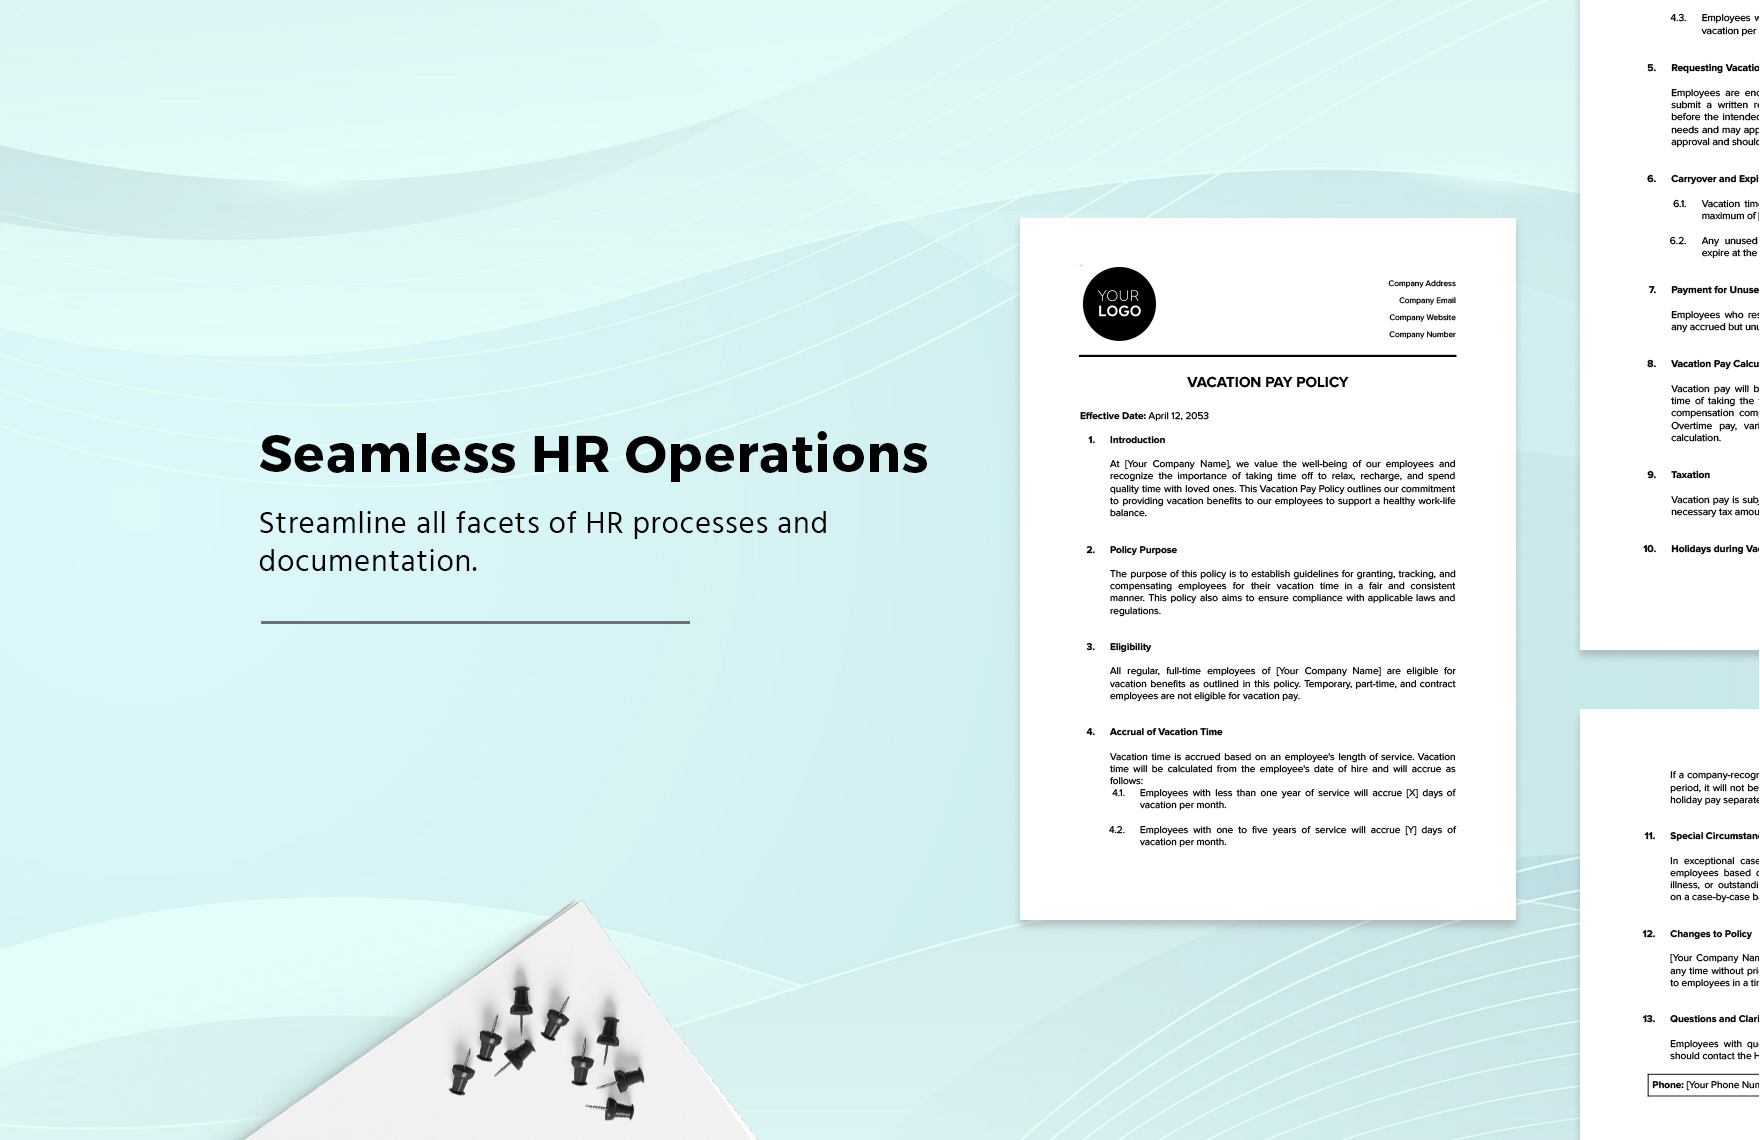 Vacation Pay Policy HR Template